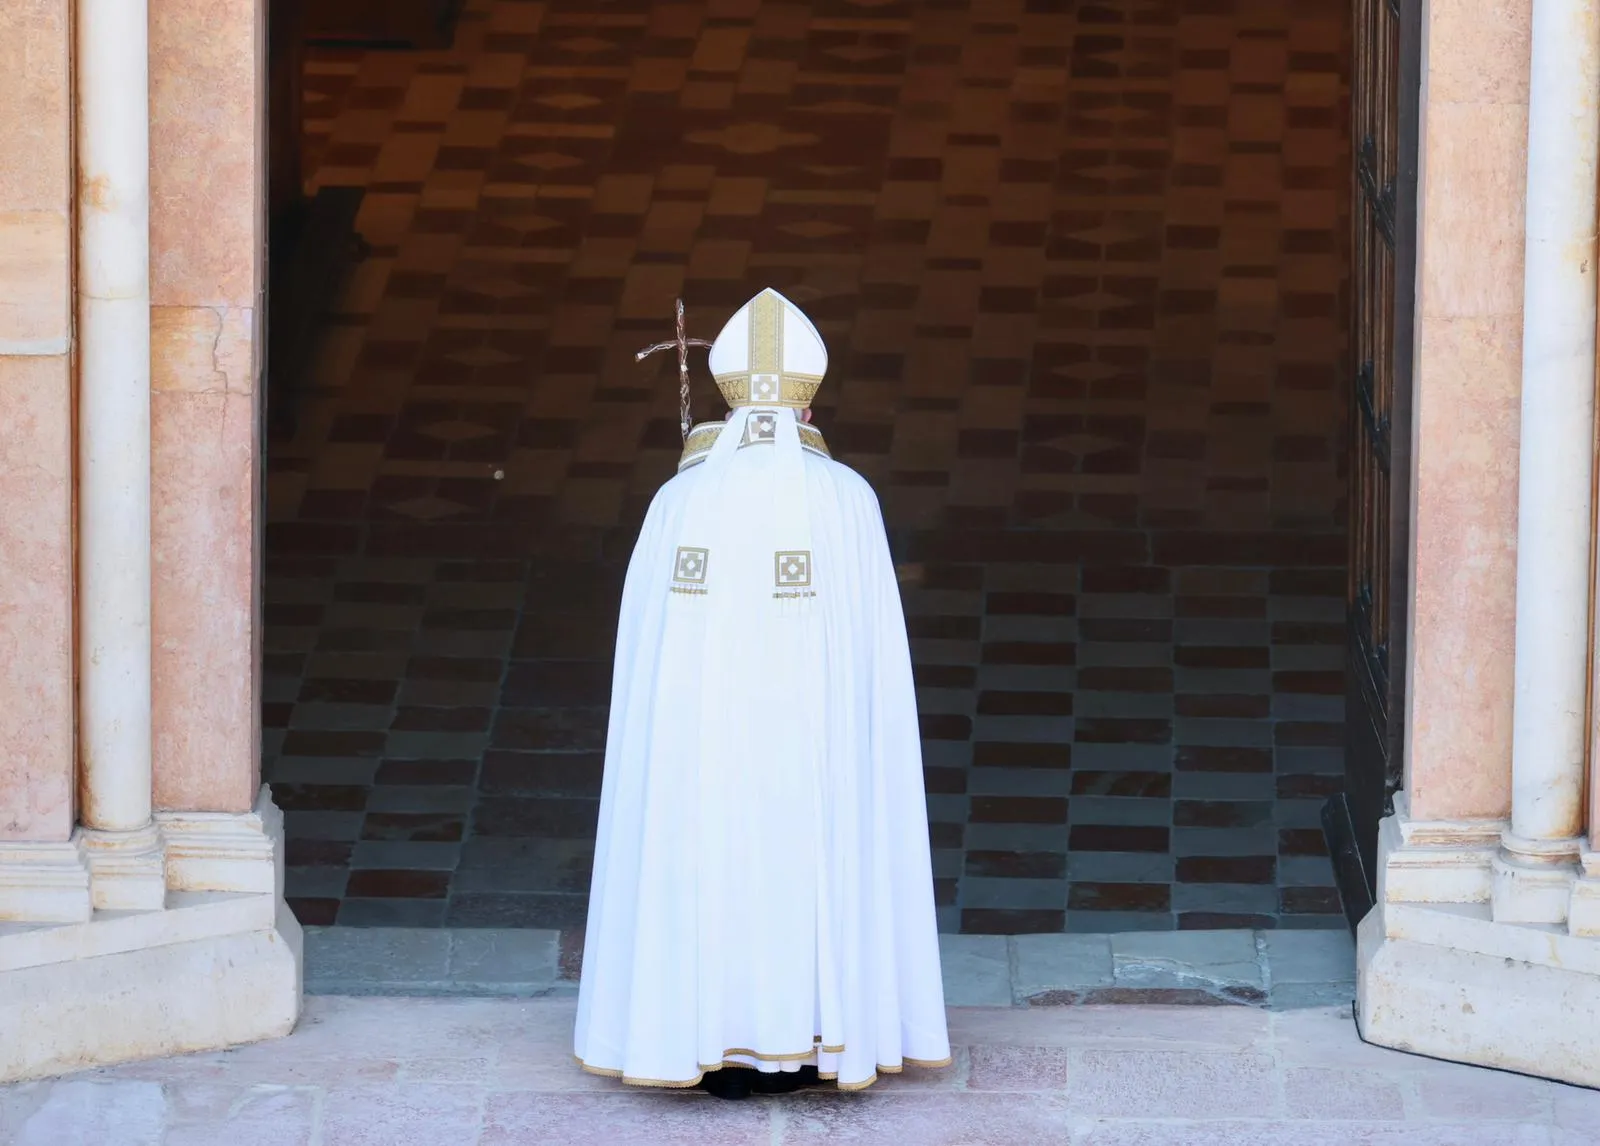 Pope Francis opens the Holy Door in L'Aquila, Italy on Aug. 28, 2022. Credit: Daniel Ibanez/CNA